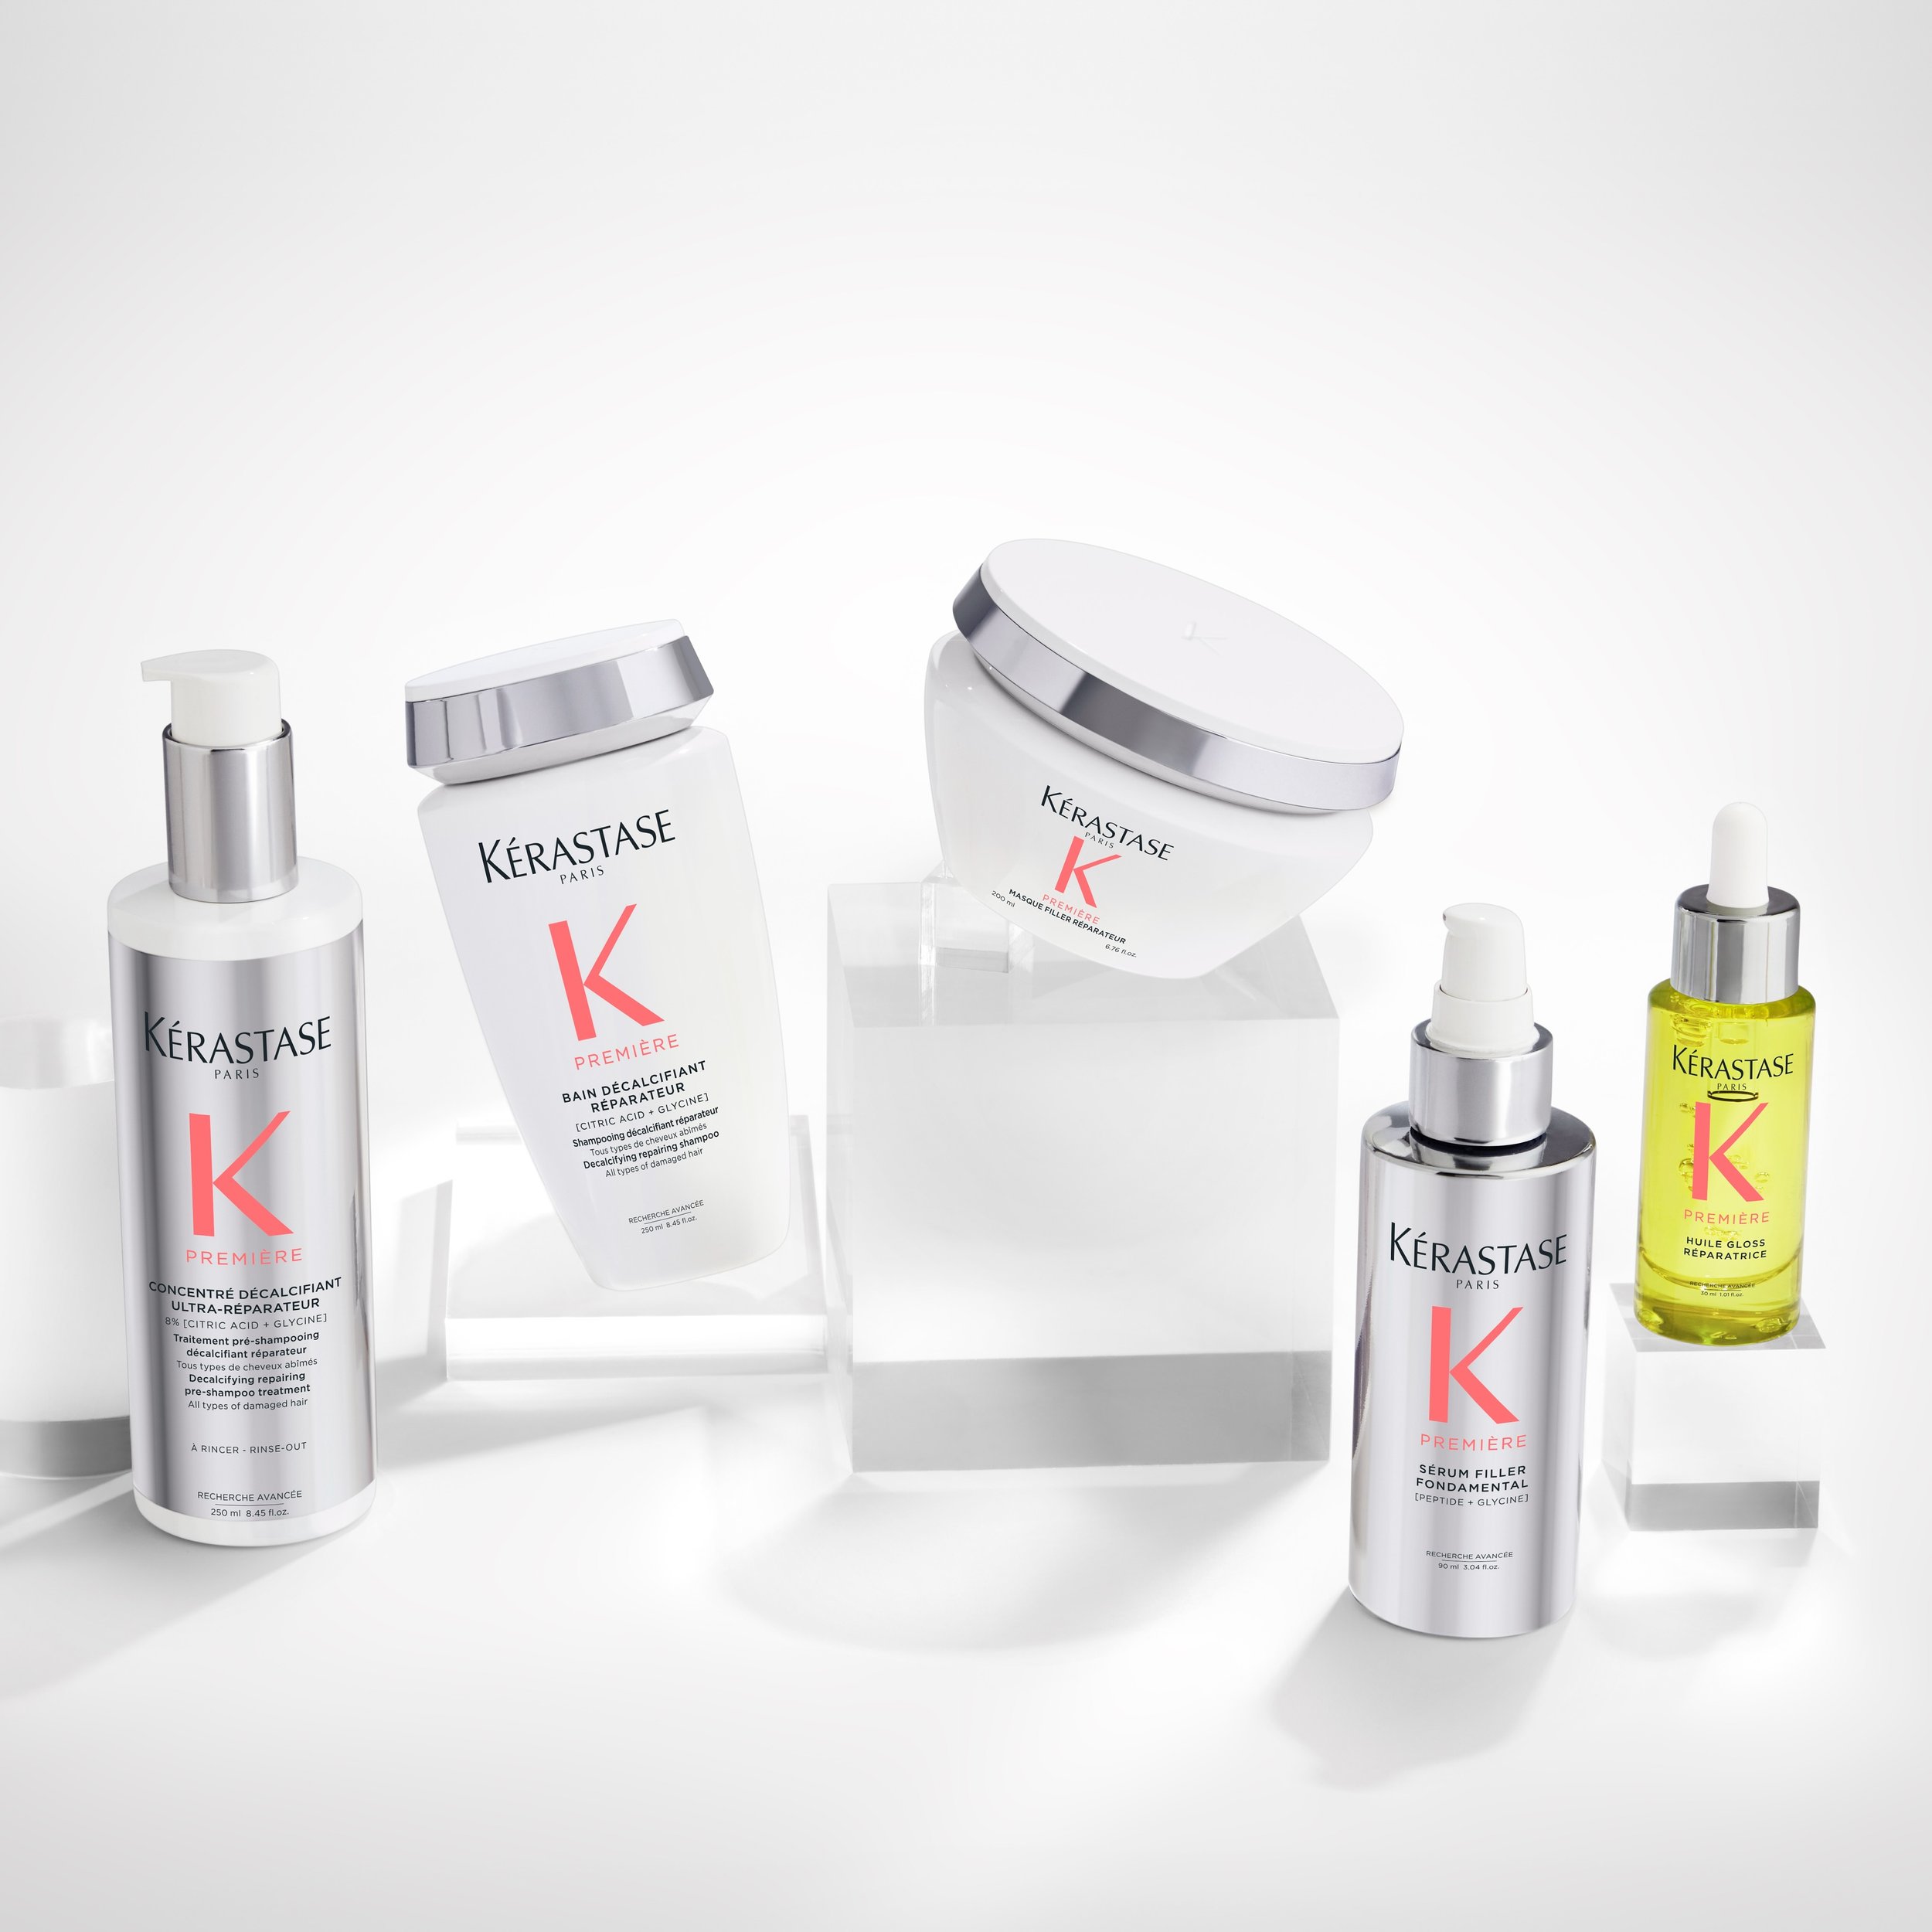 NEW KERASTACE PREMIERE COLLECTION🧡❤️
Suited to all types of damaged hair, Premi&eacute;re is formulated with the perfect combination of citric acid and glycine to remove calcium and repair damage,  reconnecting keratin links. 
Shop products in Salon